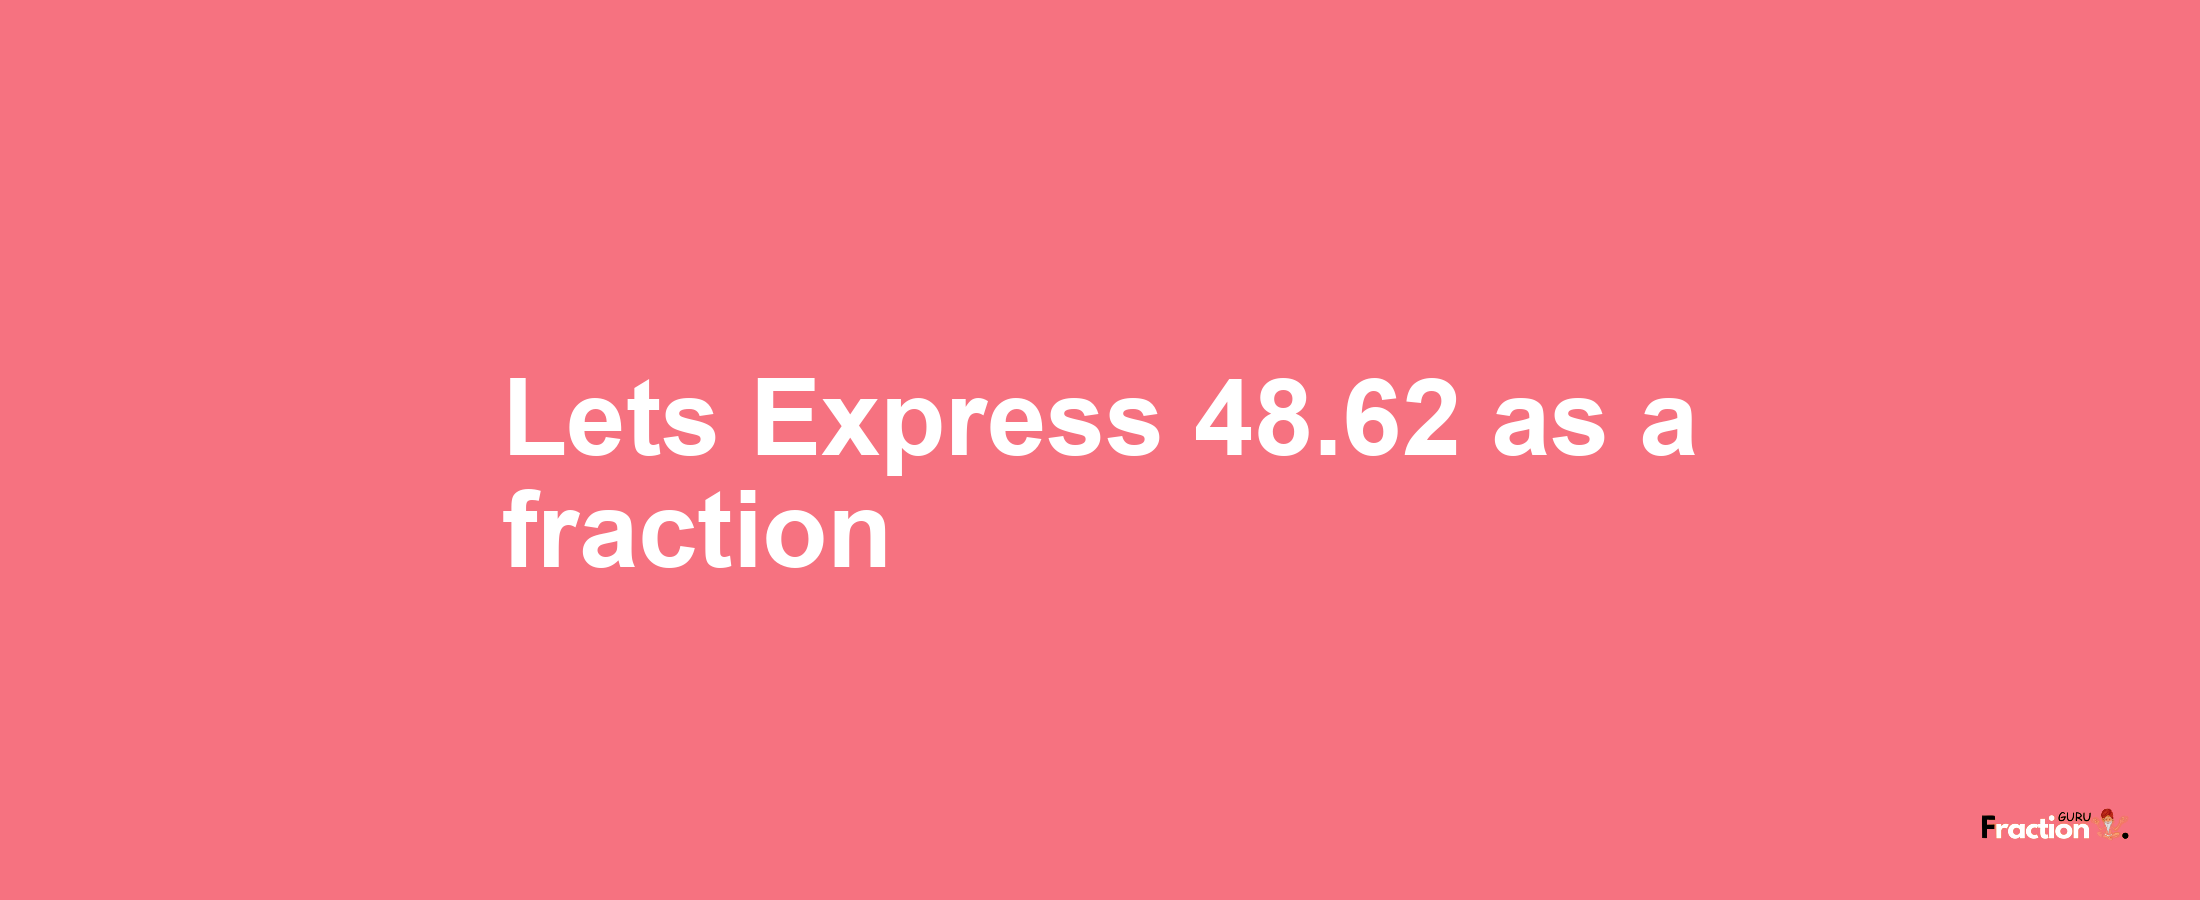 Lets Express 48.62 as afraction